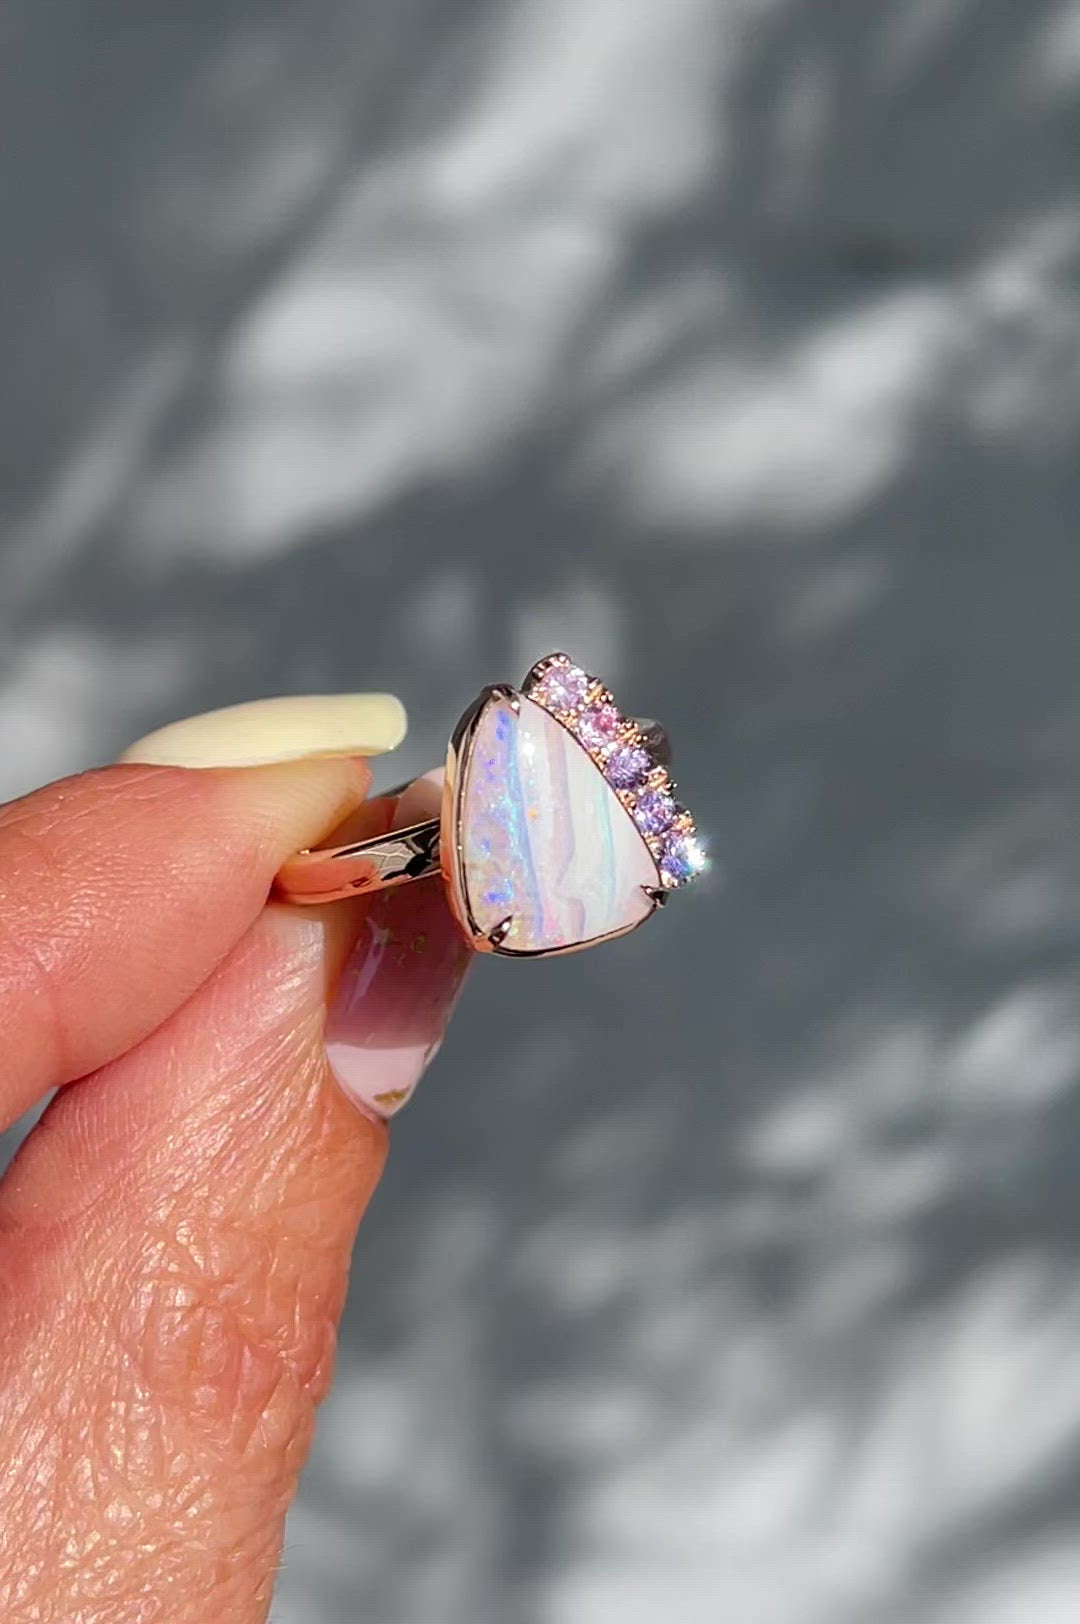 Video of Australian Opal Engagement Ring by NIXIN Jewelry held in sun. Real opal ring with pink and purple sapphires.